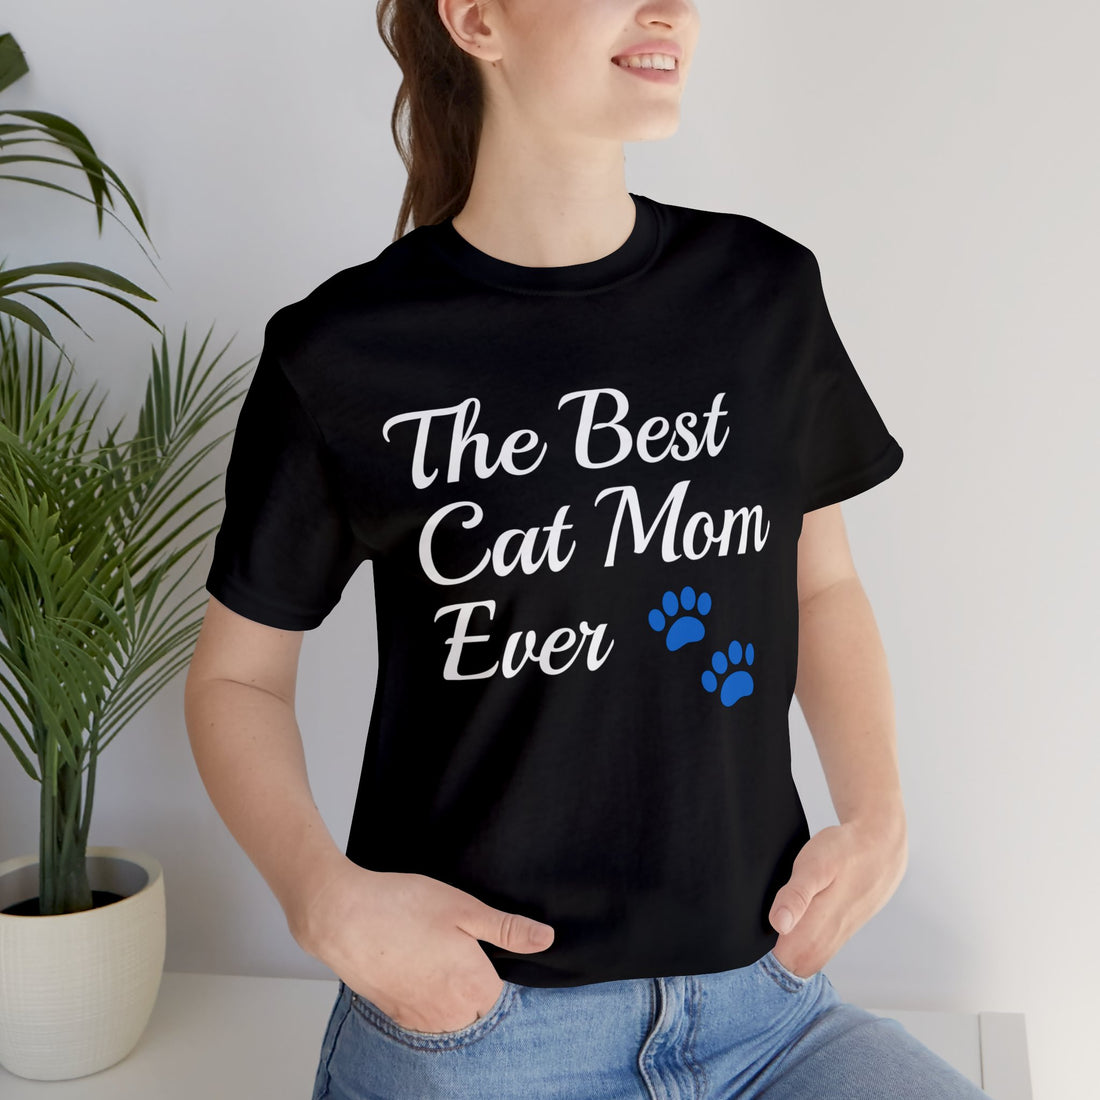 cat mom t-shirt with paws